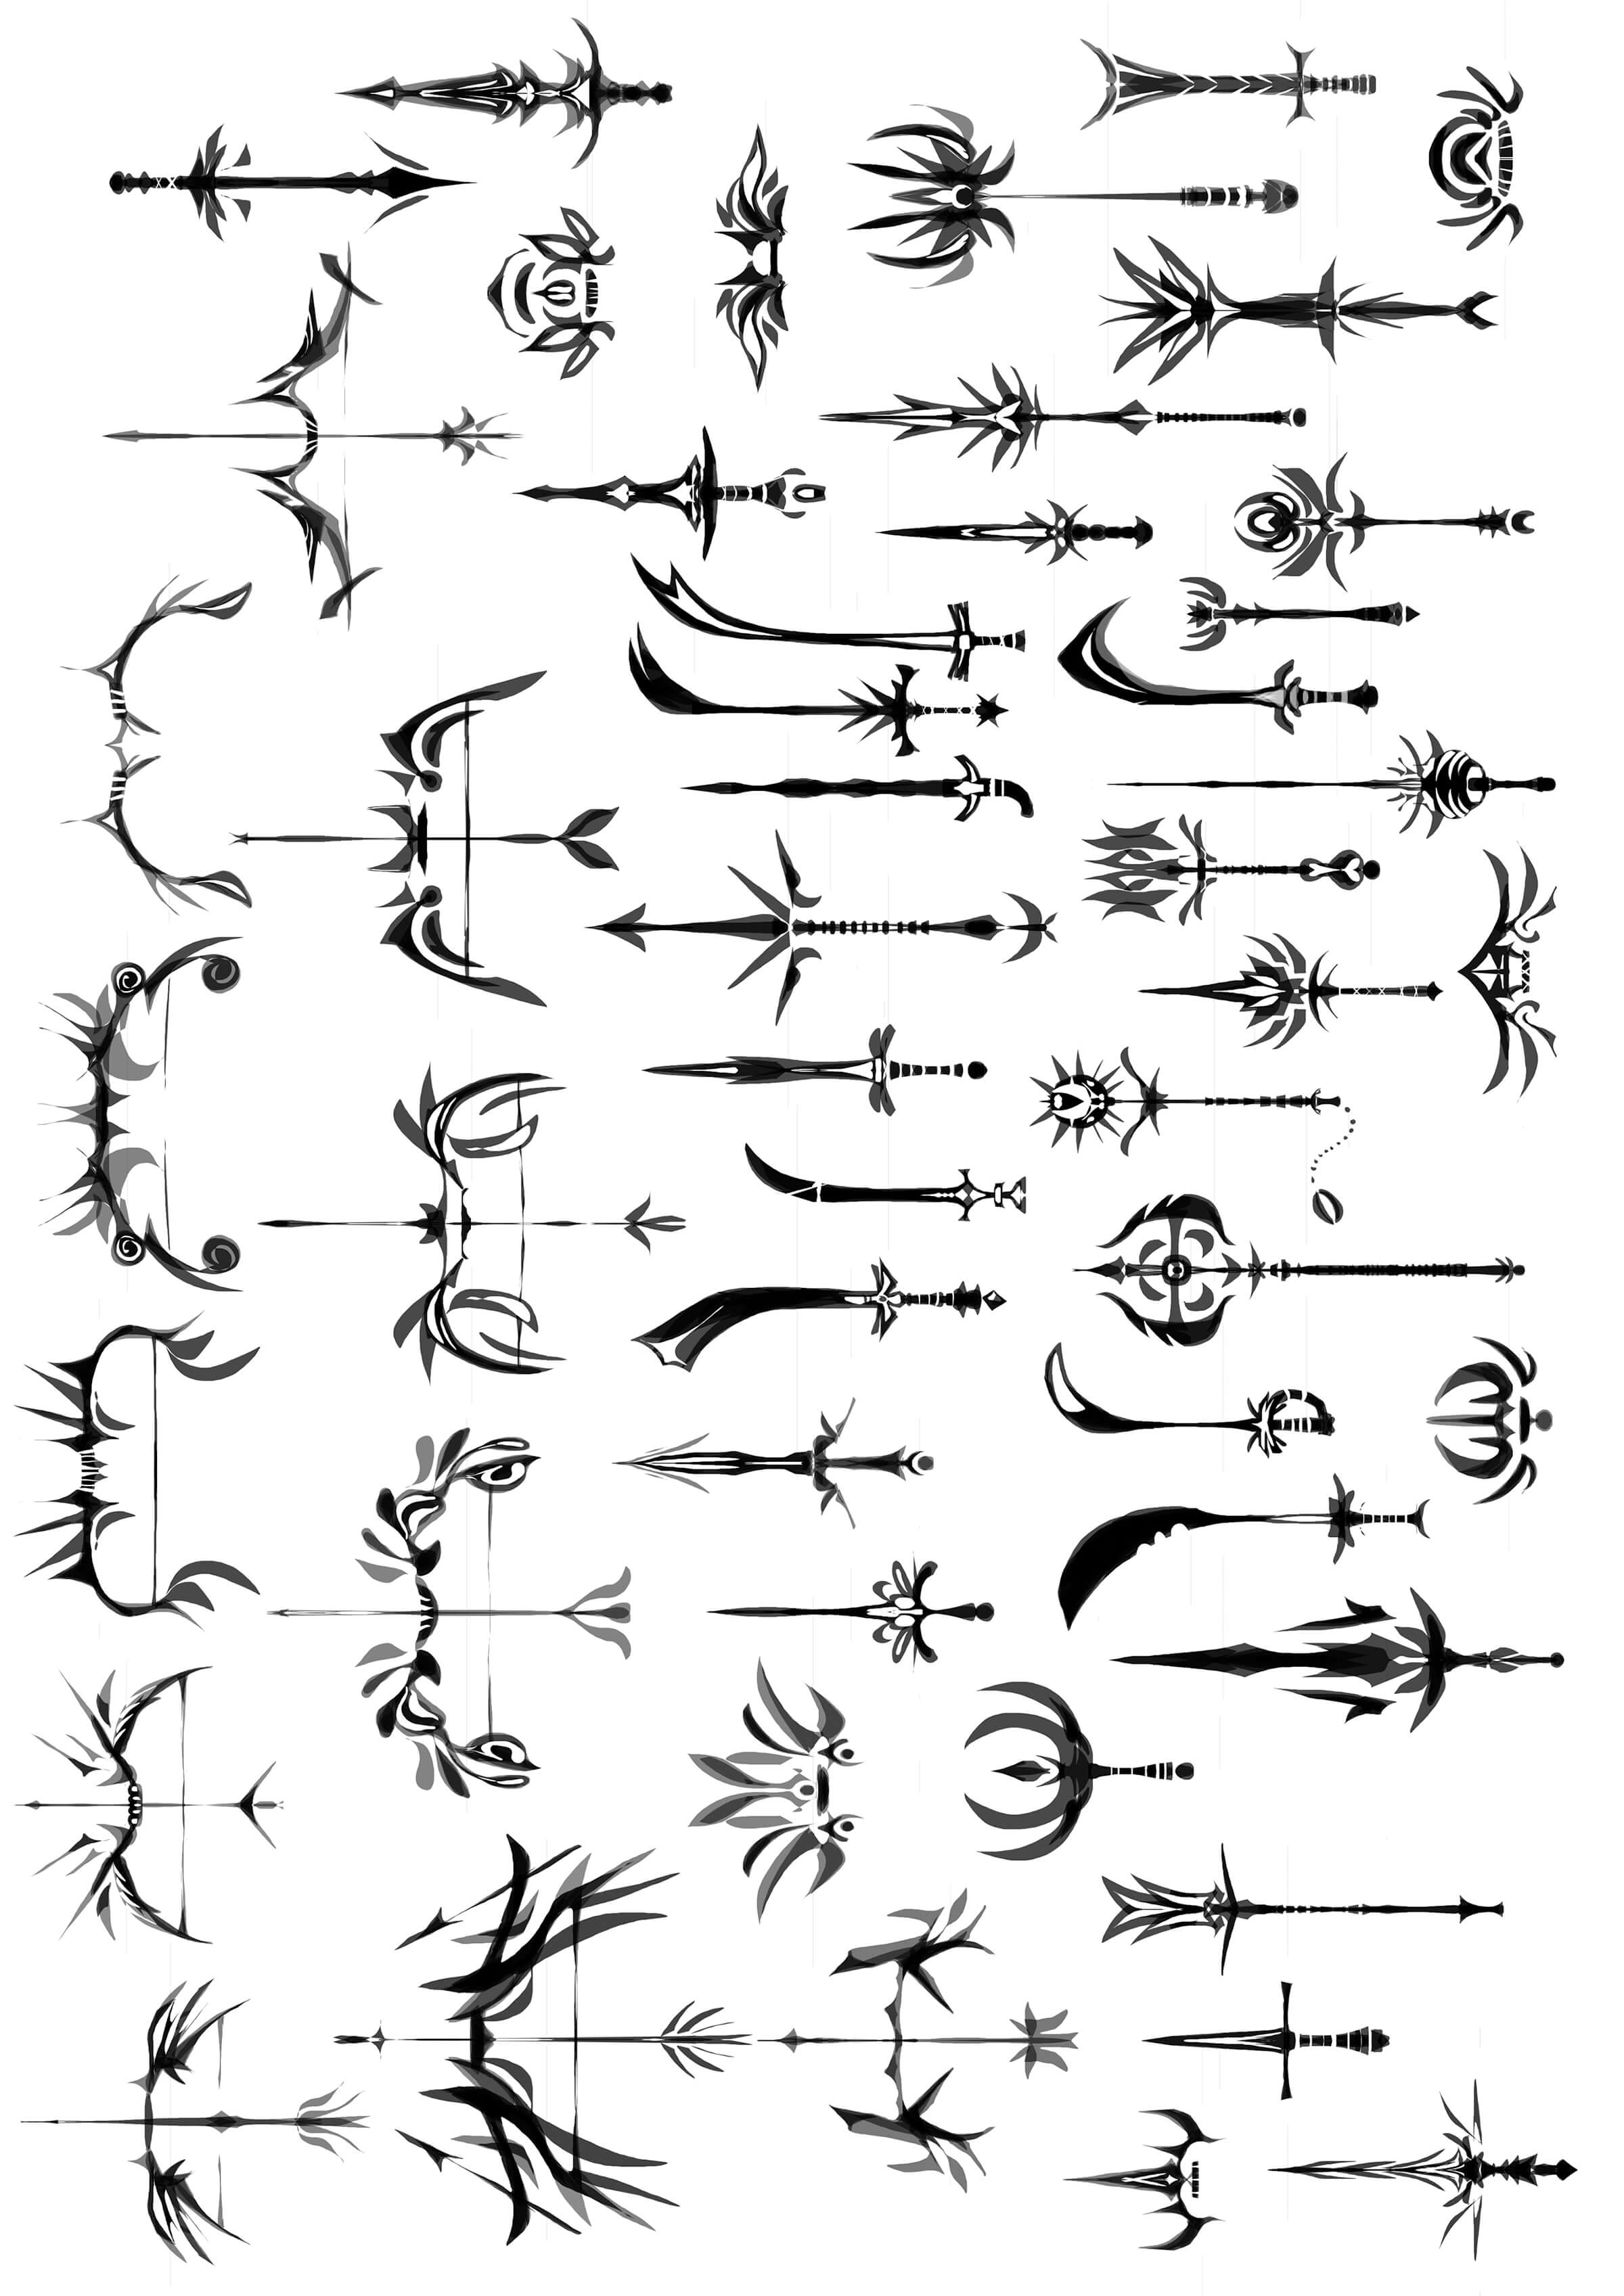 Black-and-white sketches of side-view silhouettes of various ornate swords, bows, and pikes.